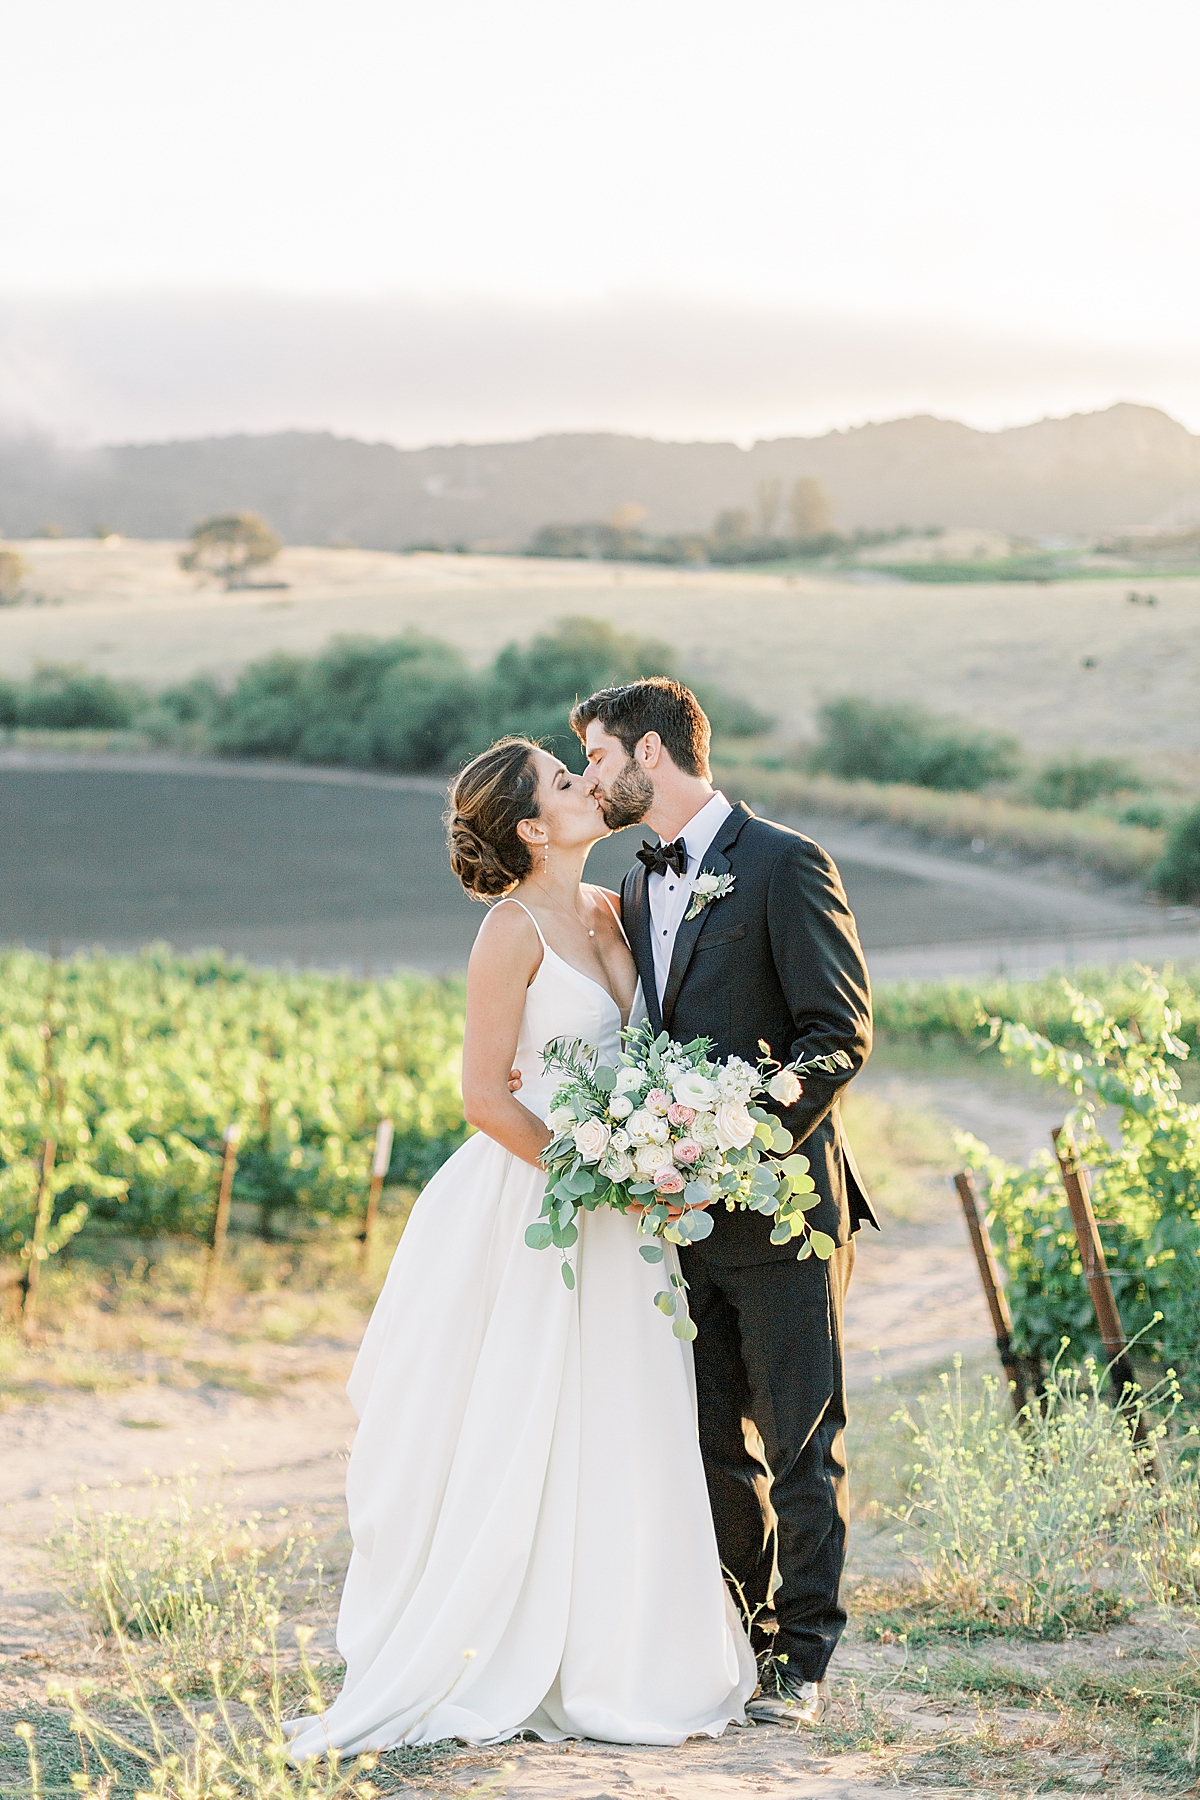 The couple sharing a kiss in front of the vineyards